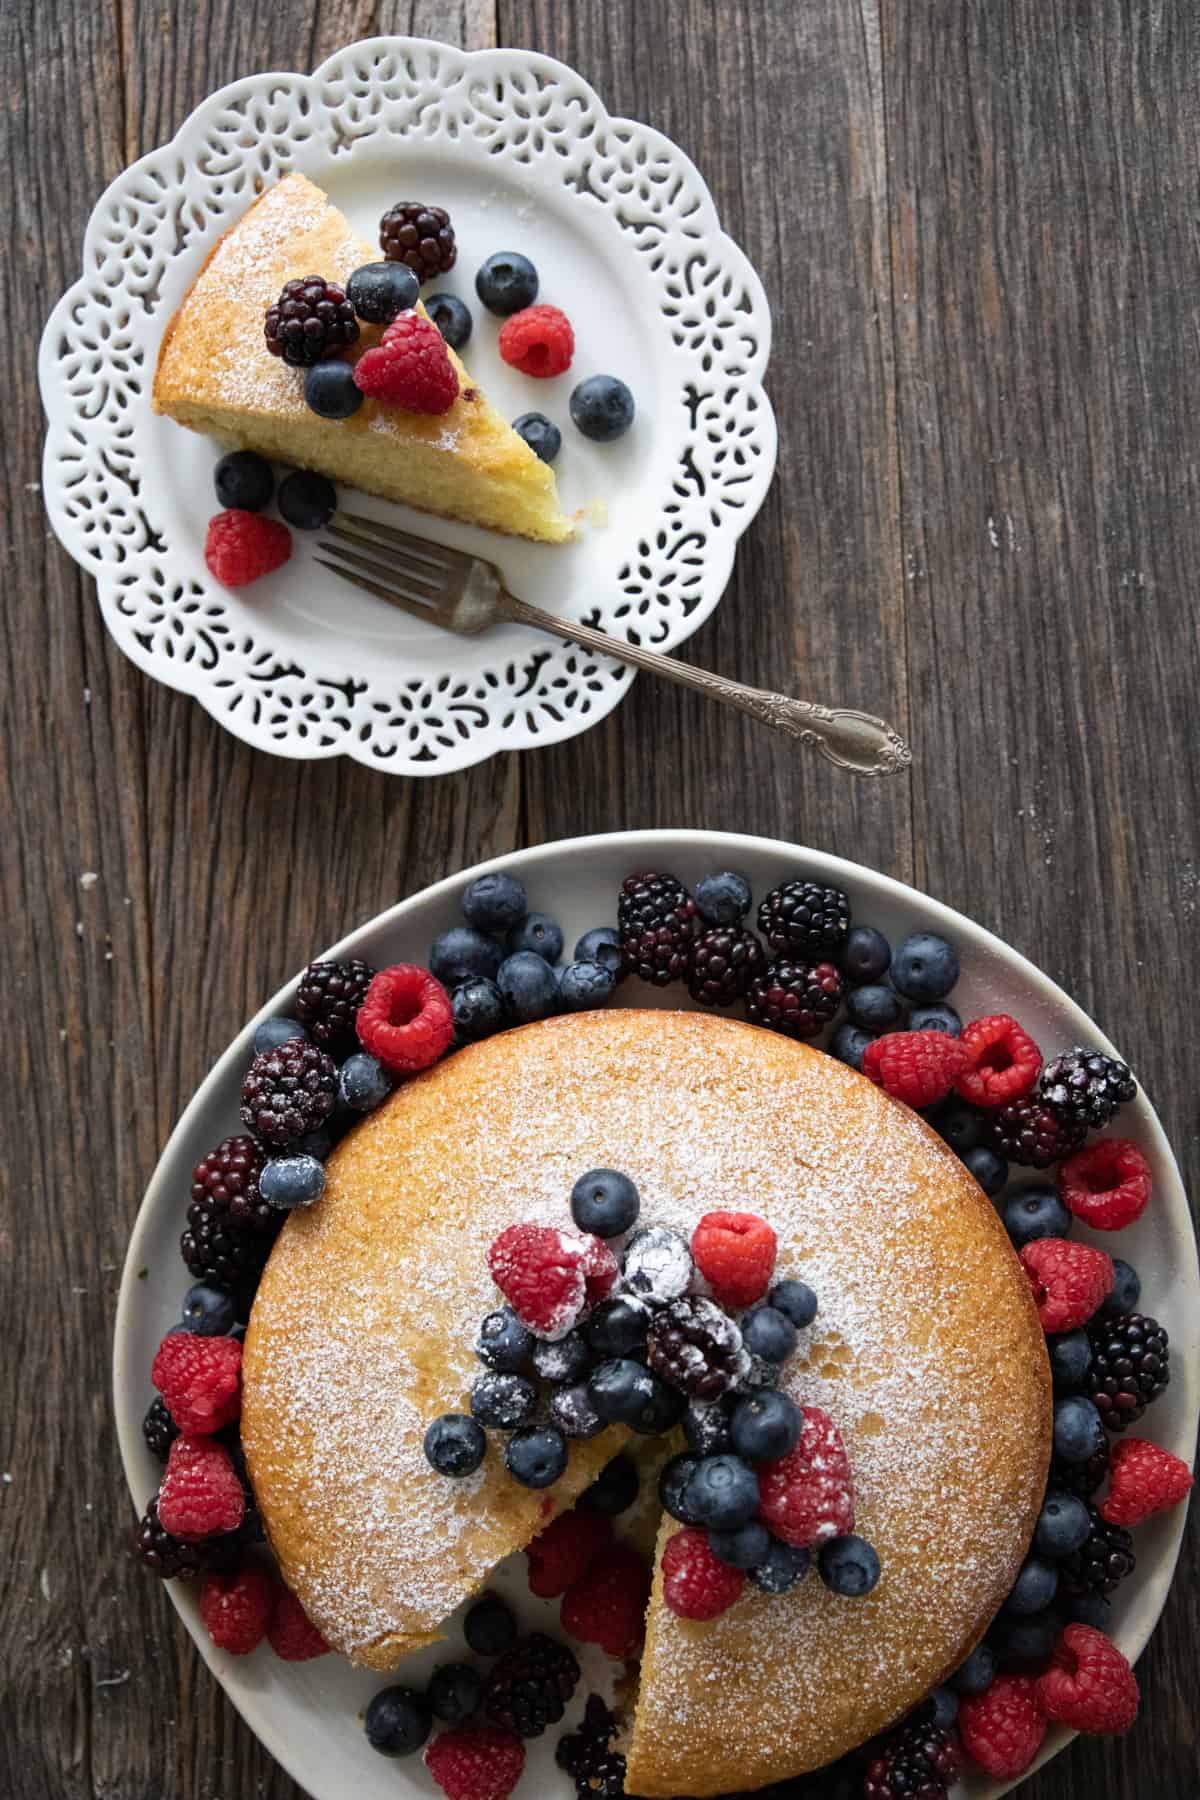 a slice of olive oil cake on a plate and the rest of the cake on a large plate .